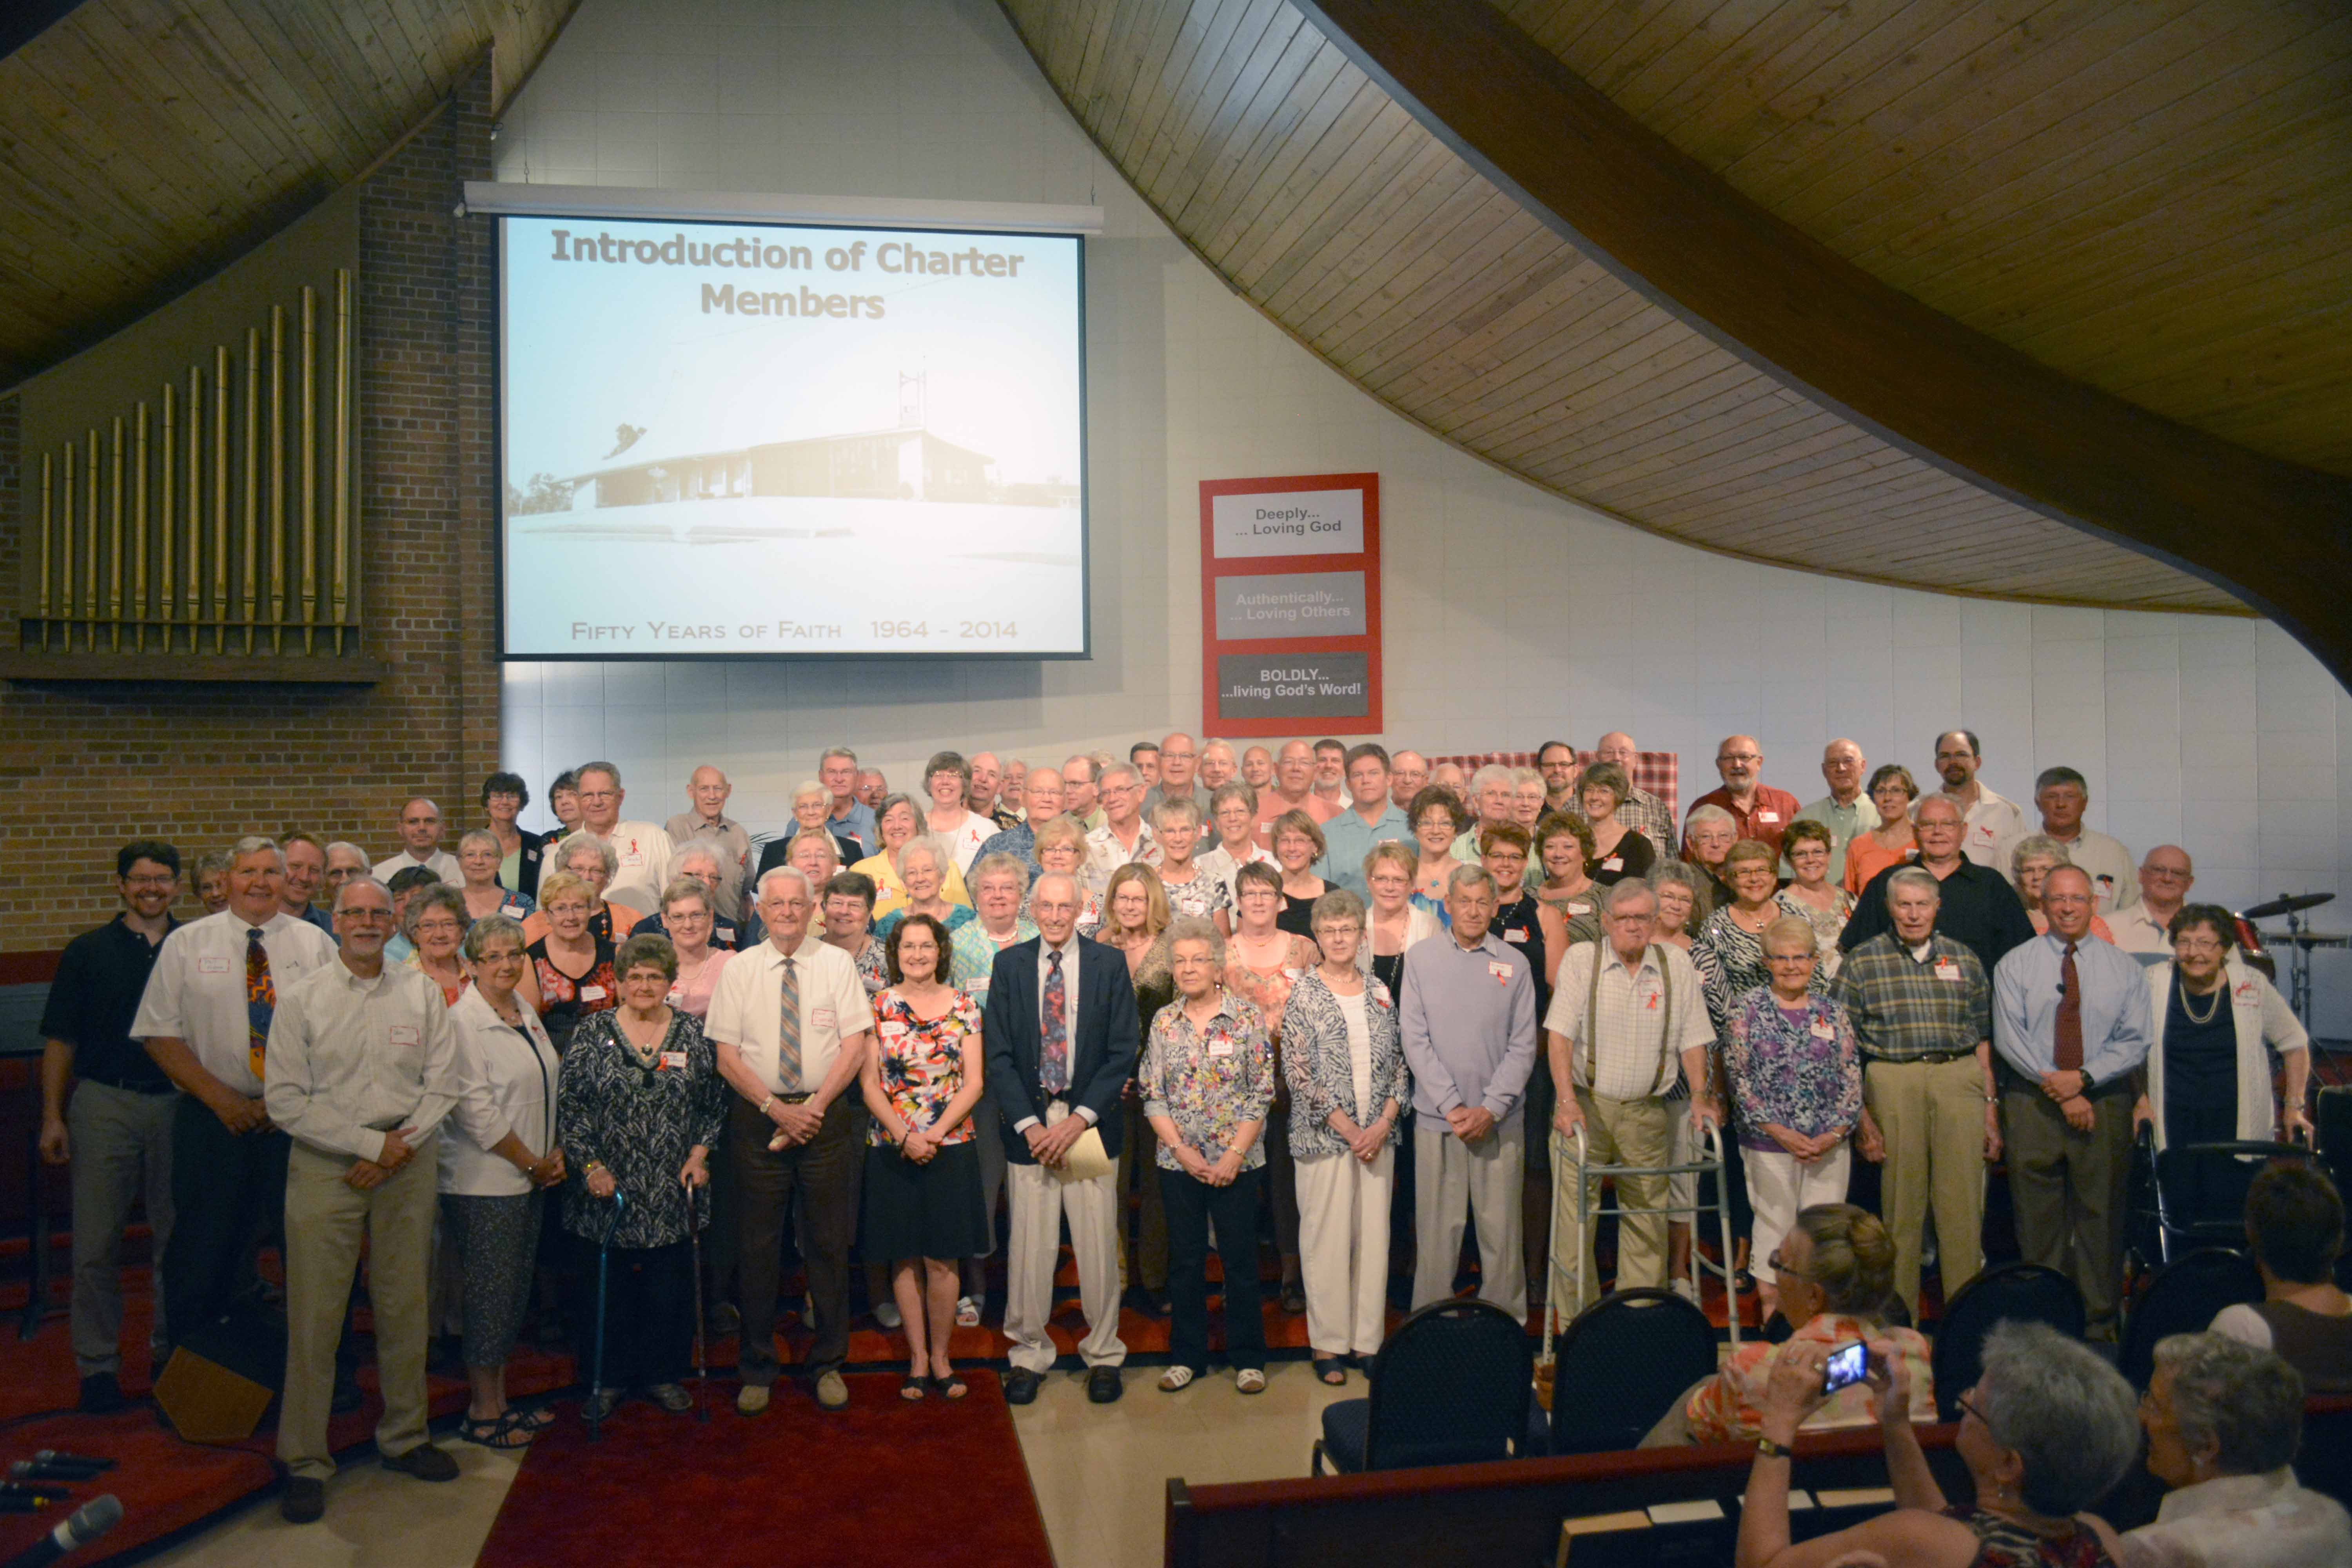 Charter Members with Pastors and Staff